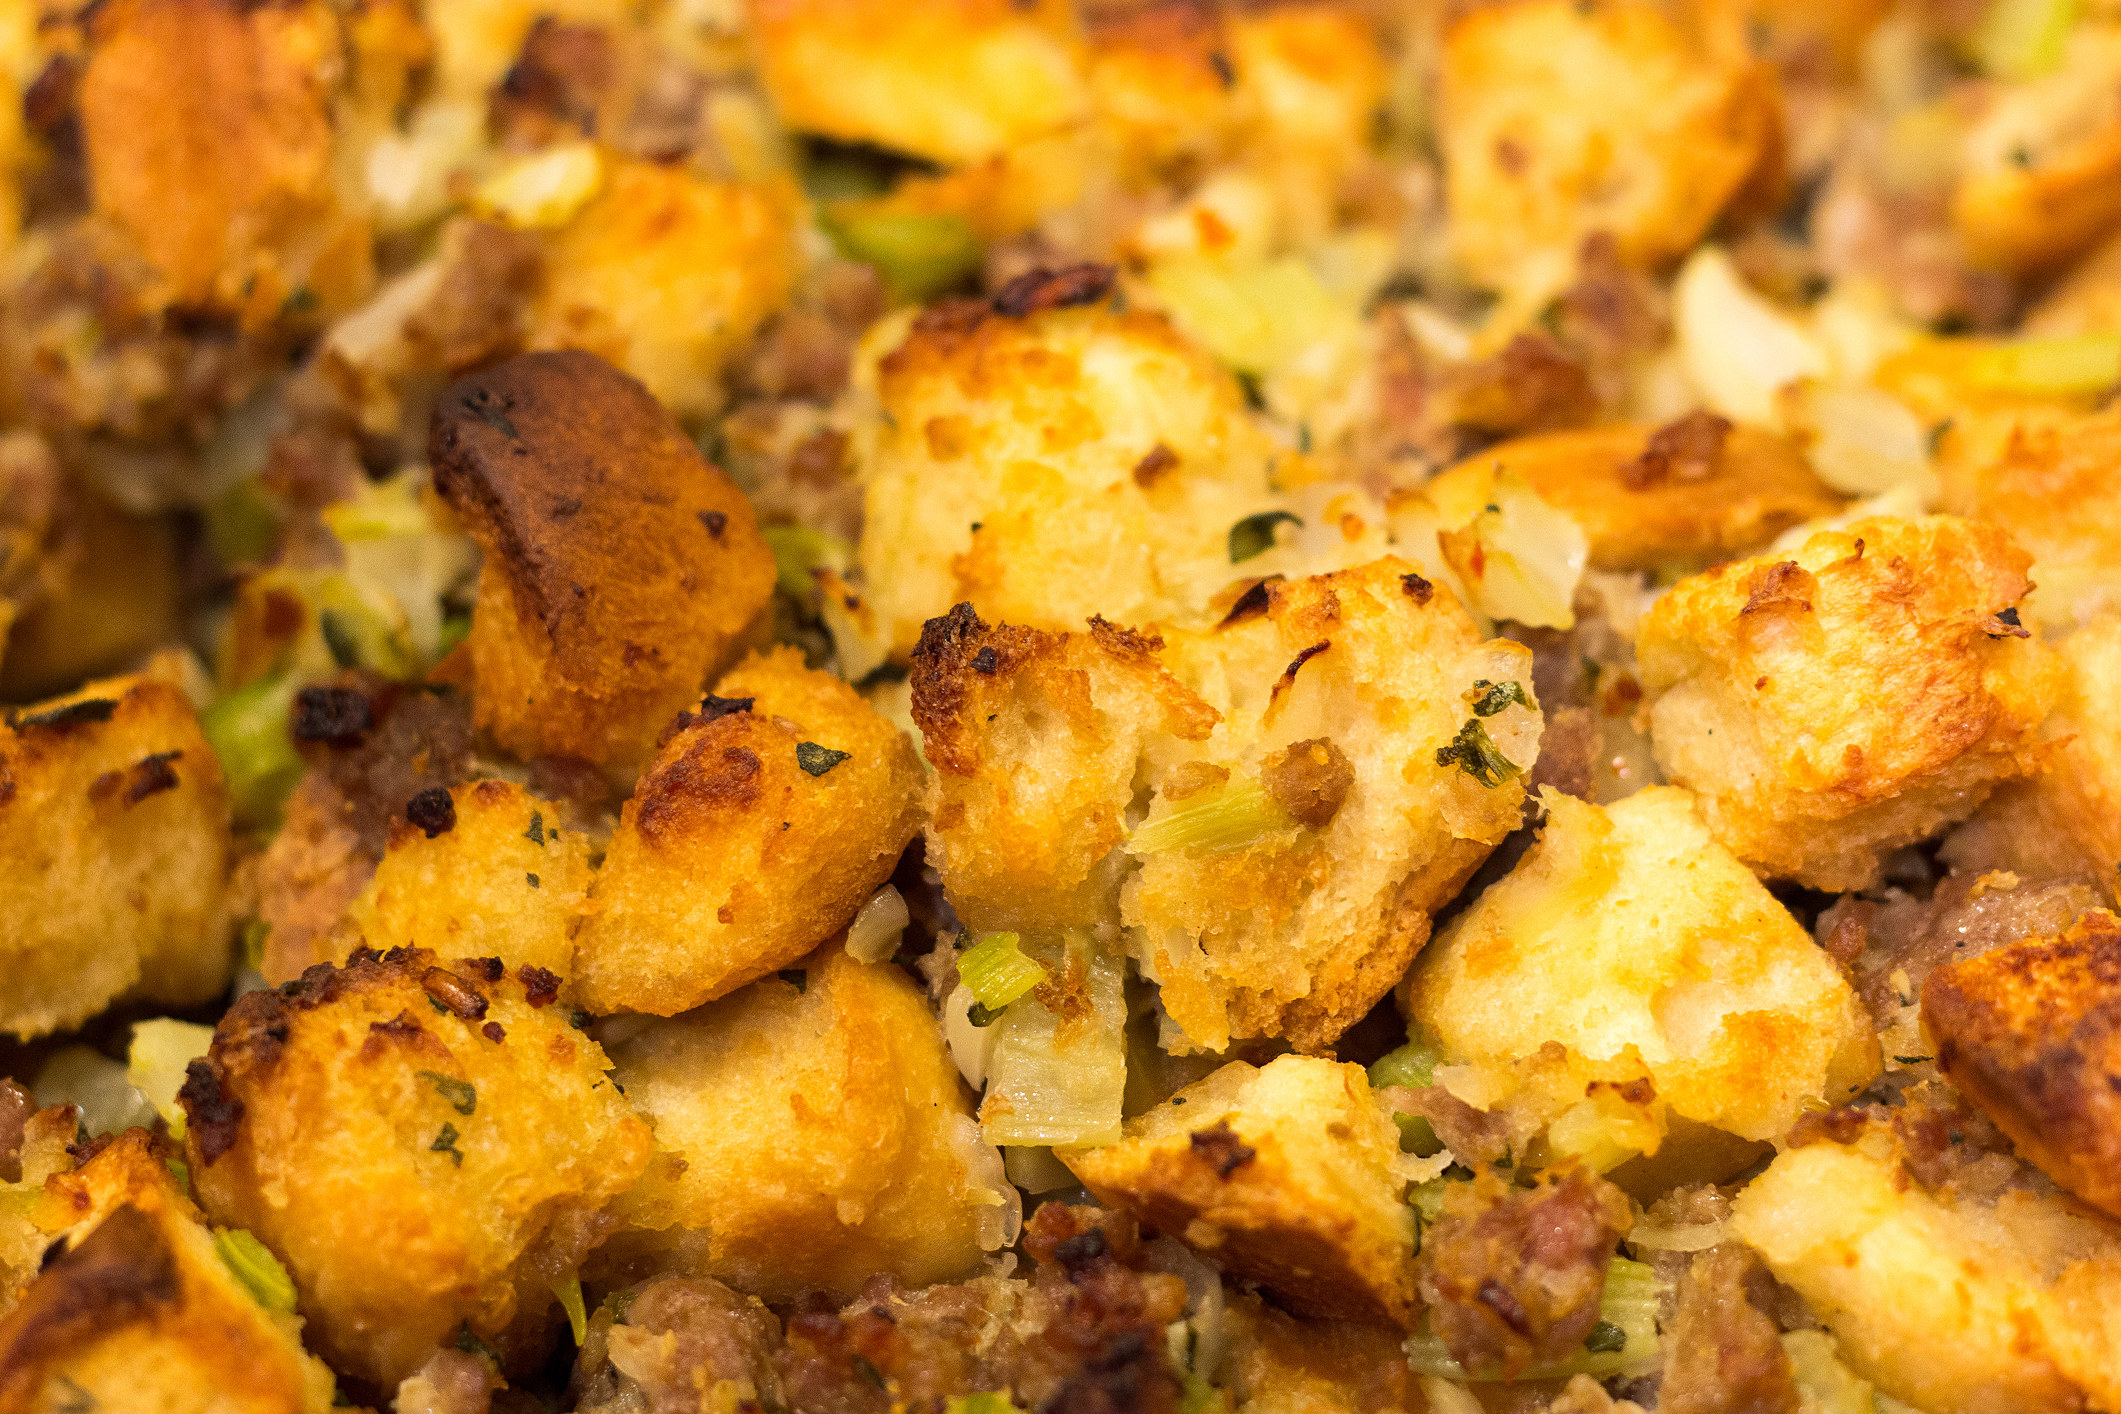 A close-up of stuffing.